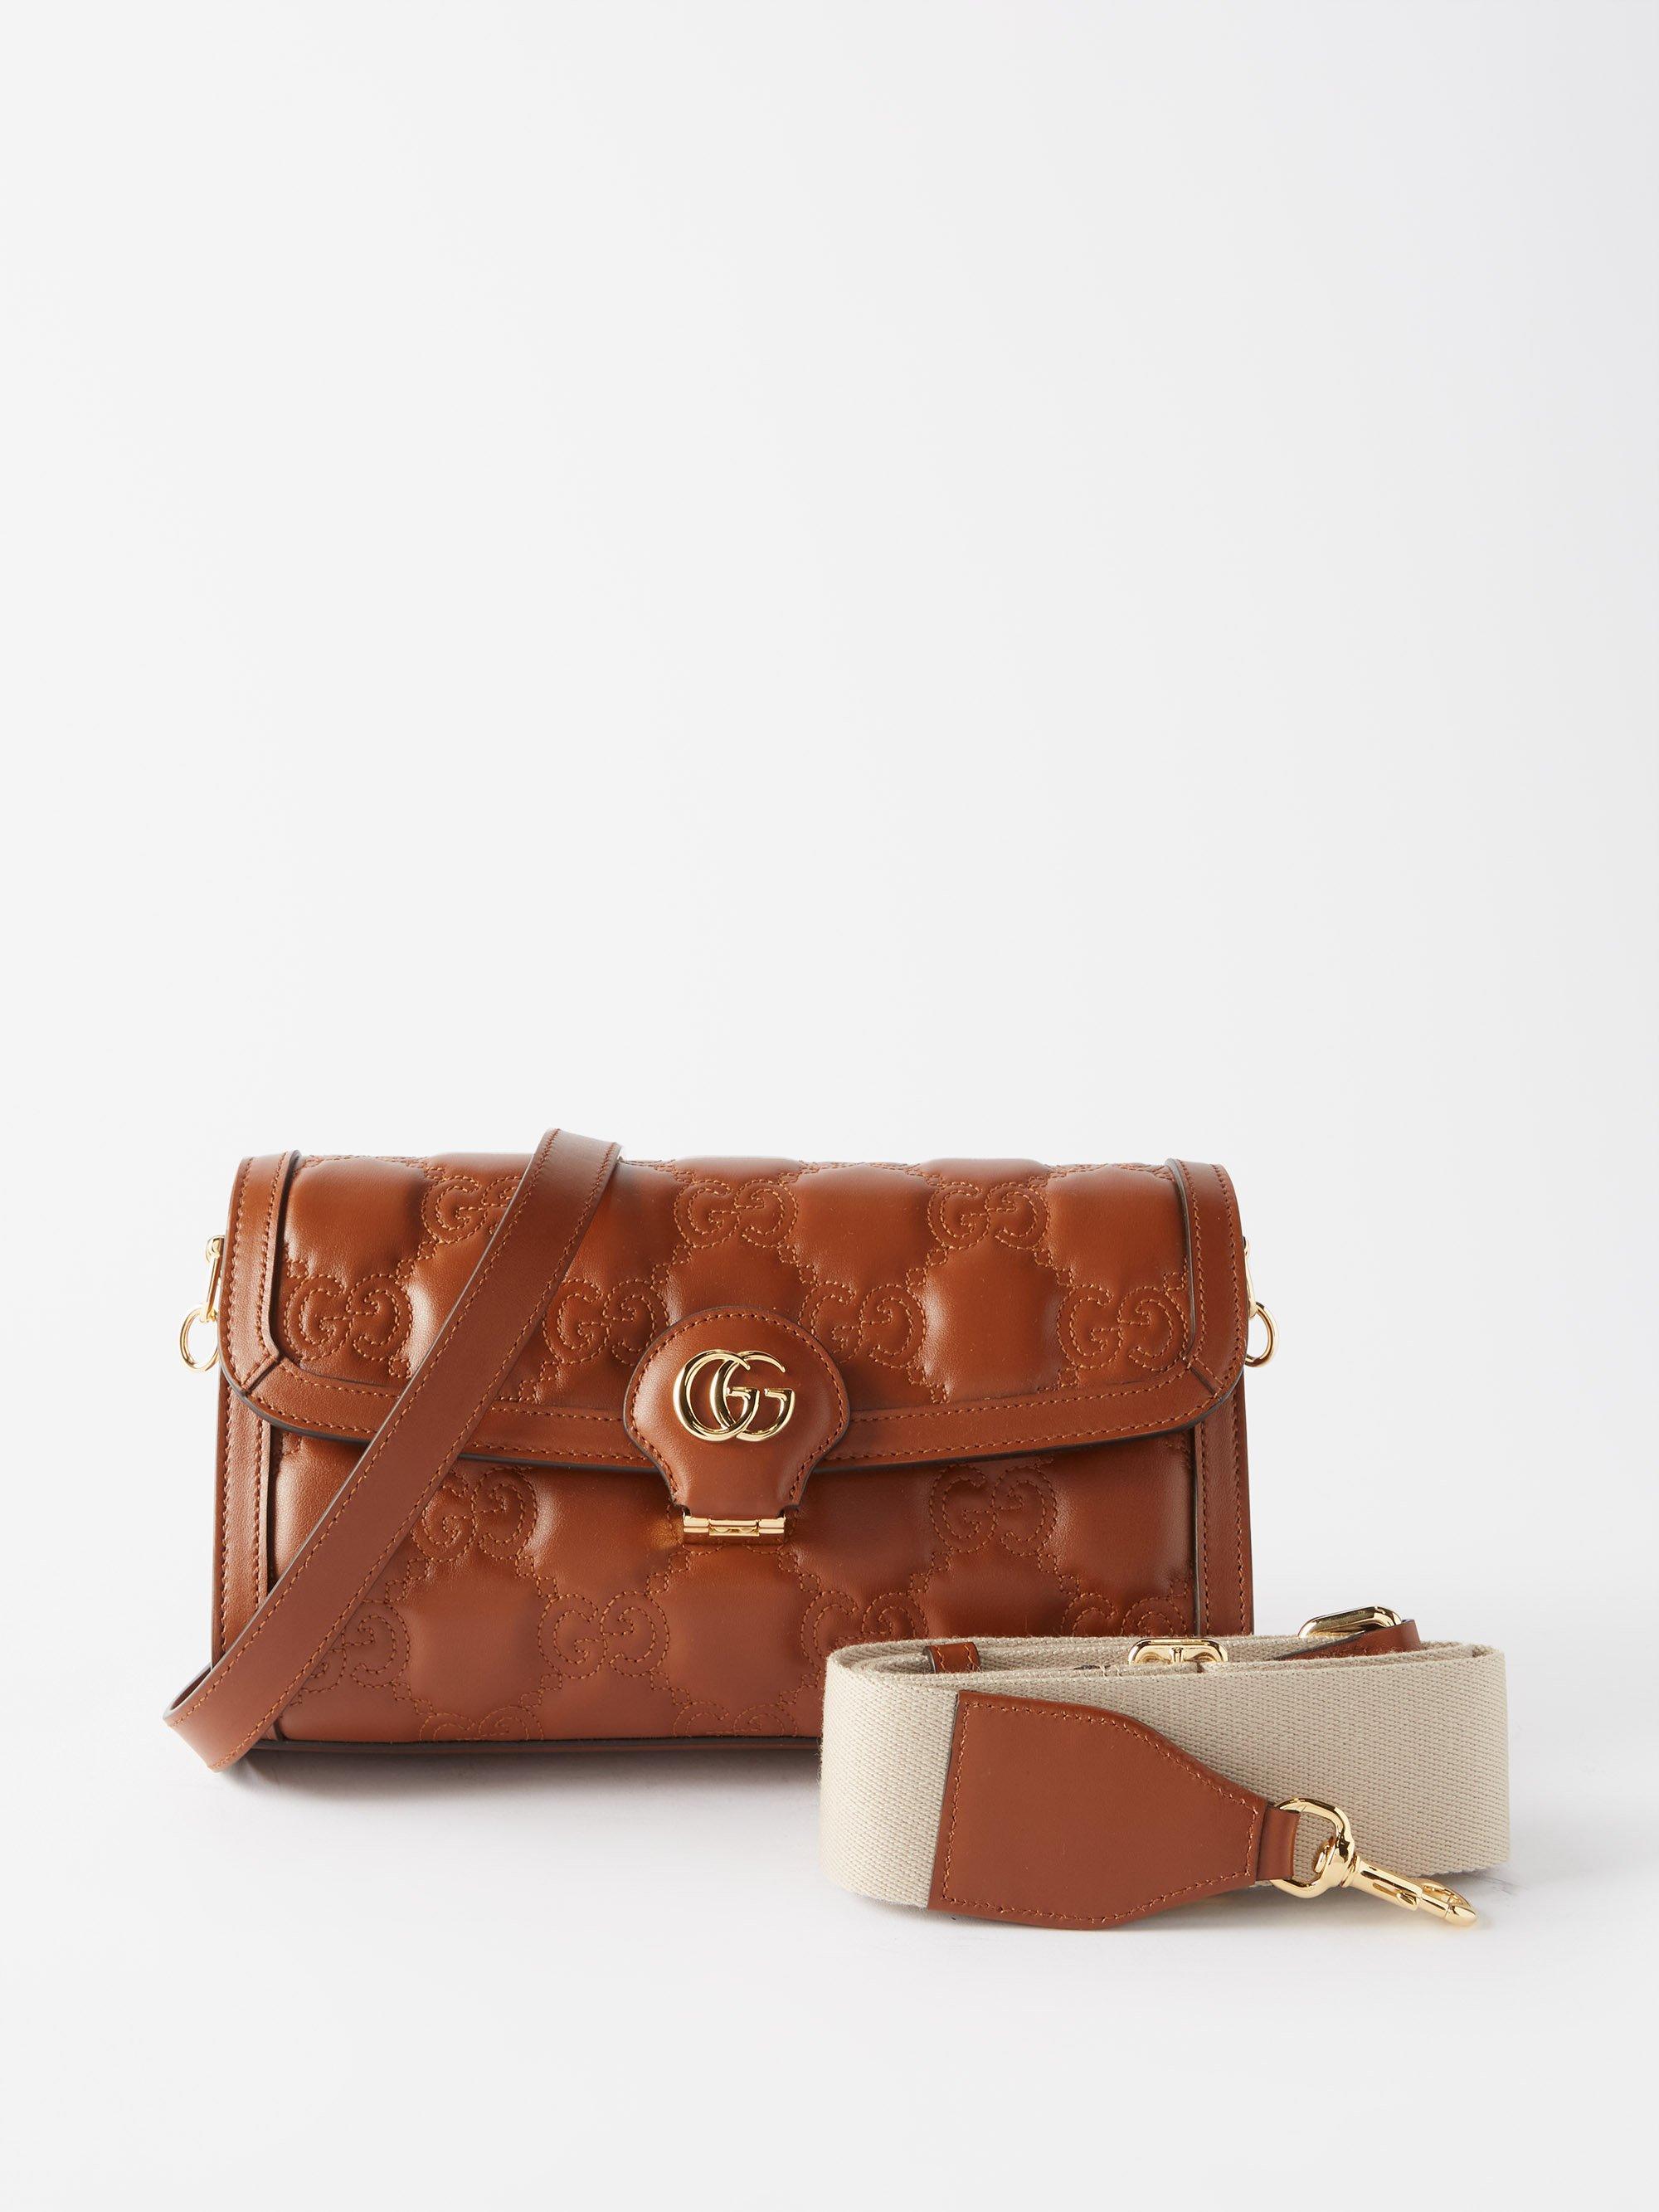 Gucci GG-matelassé Small Leather Cross-body Bag in Brown | Lyst